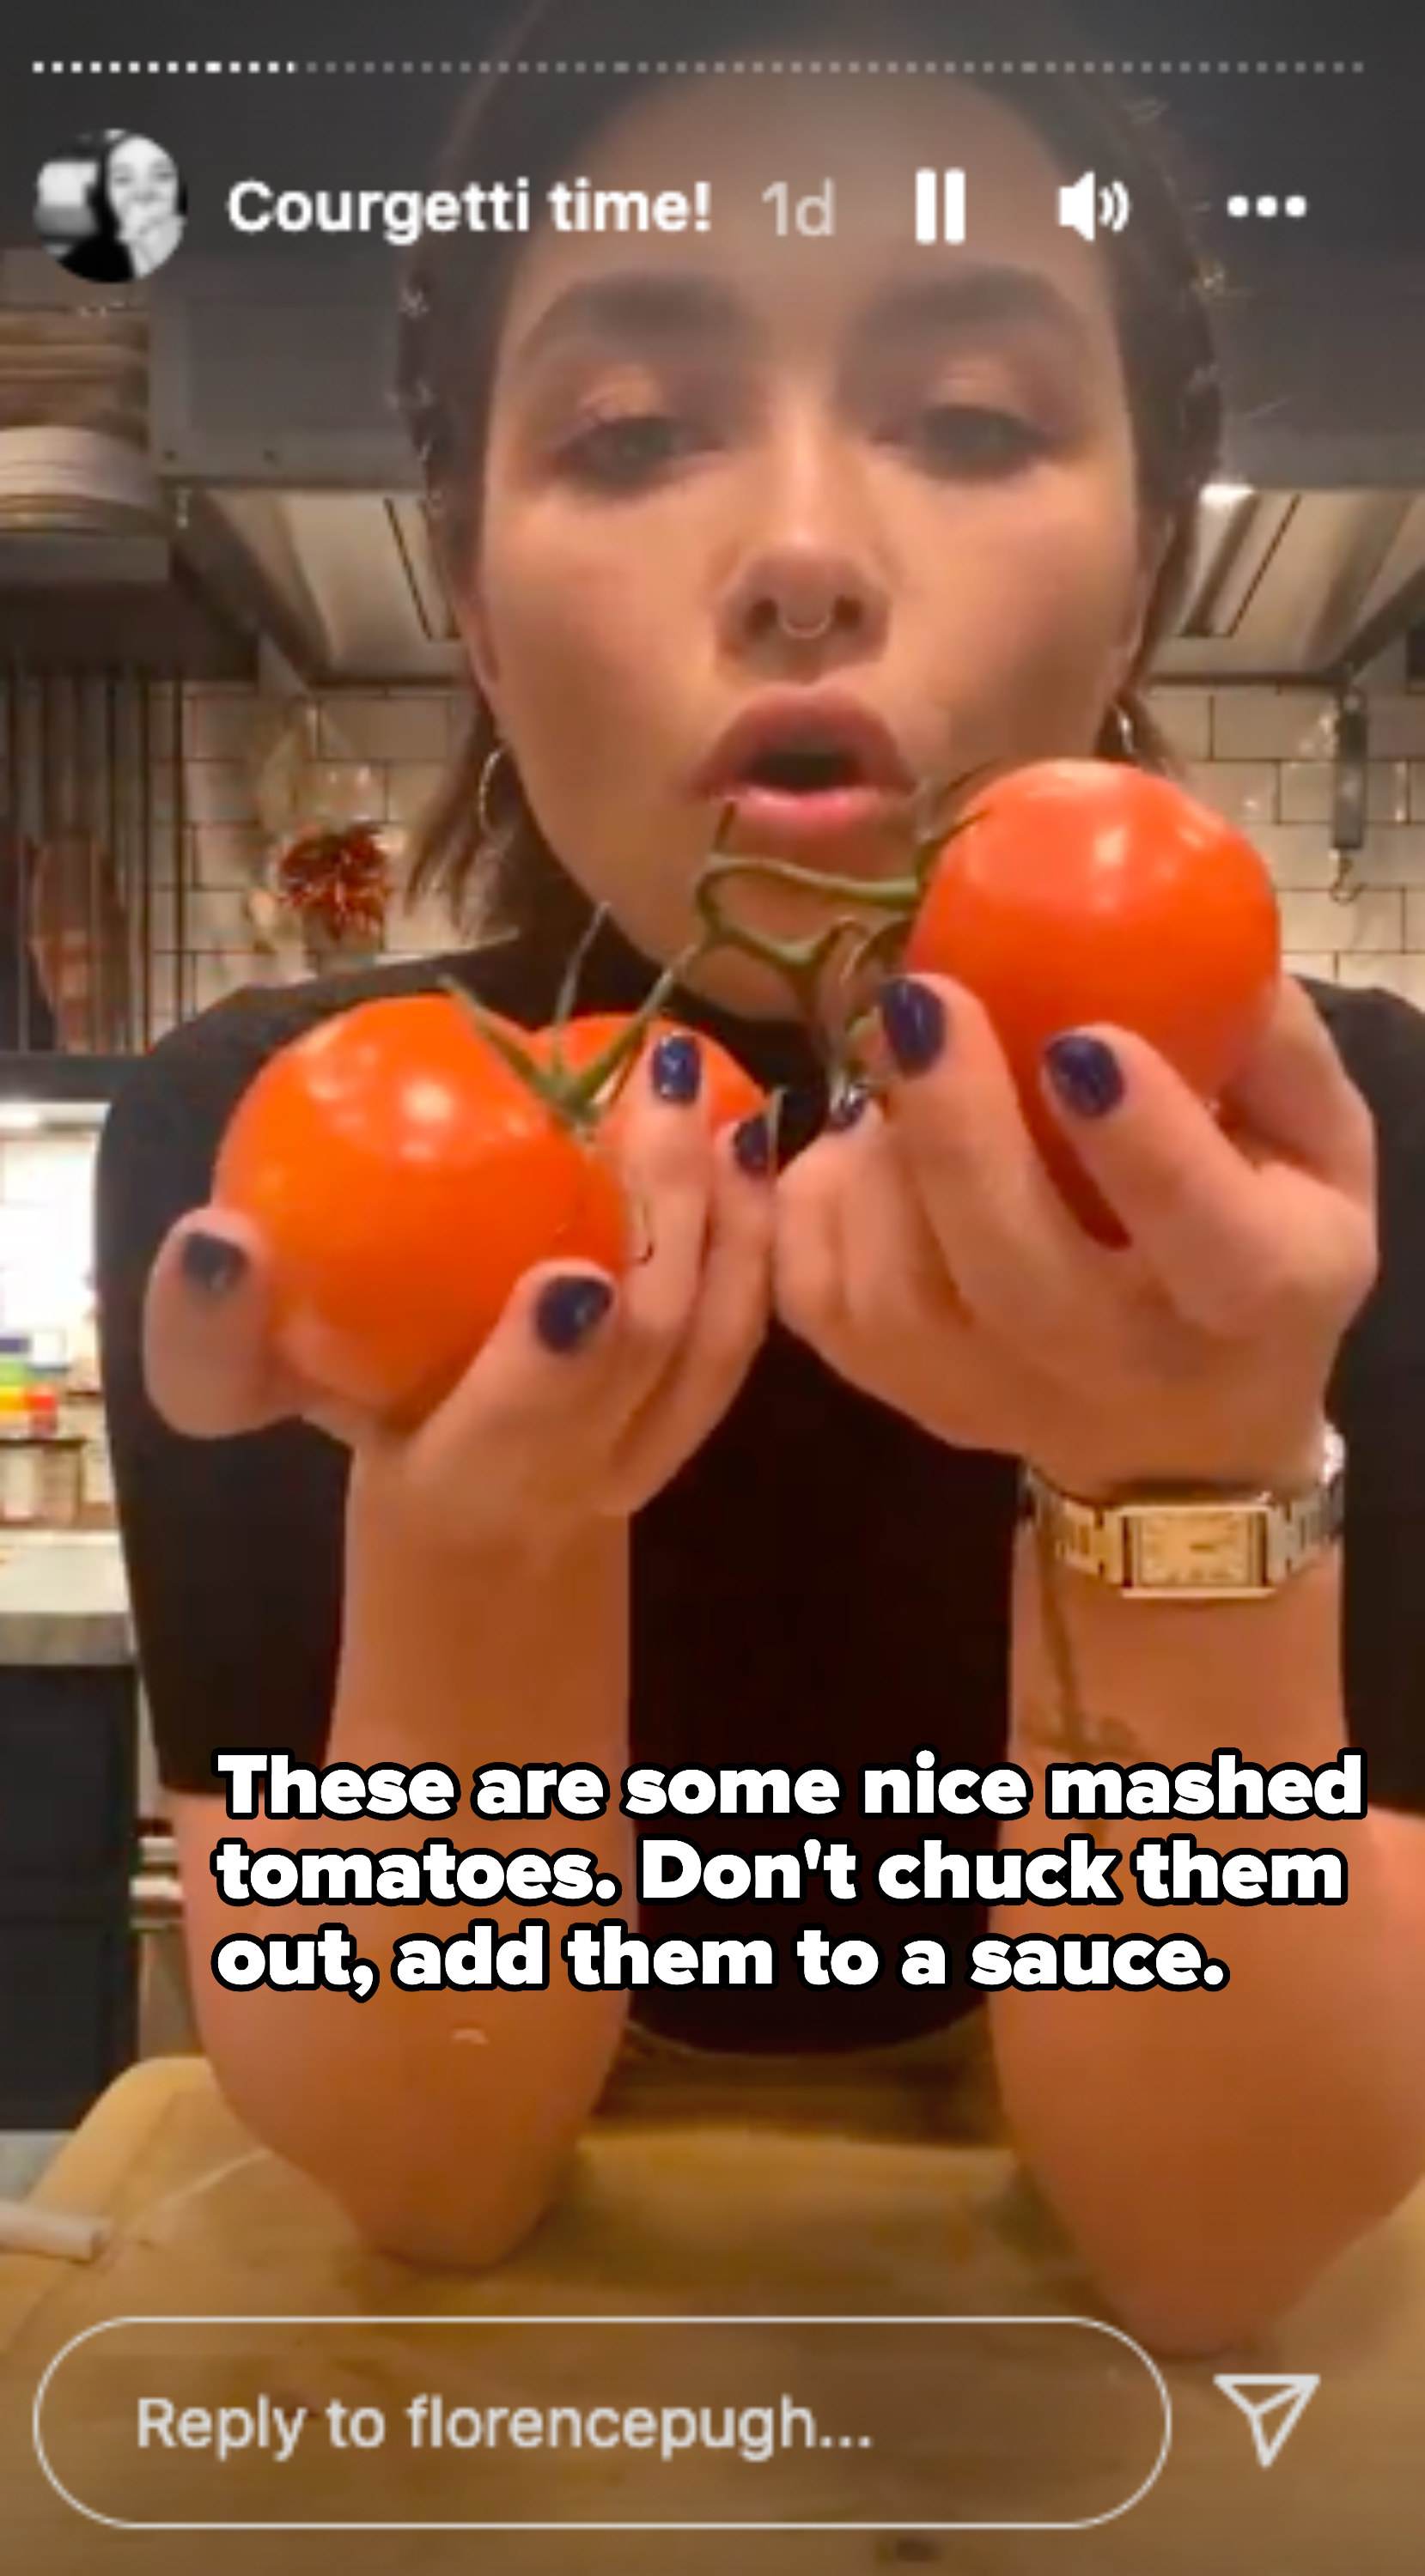 Florence talking about tomatoes and not wasting food